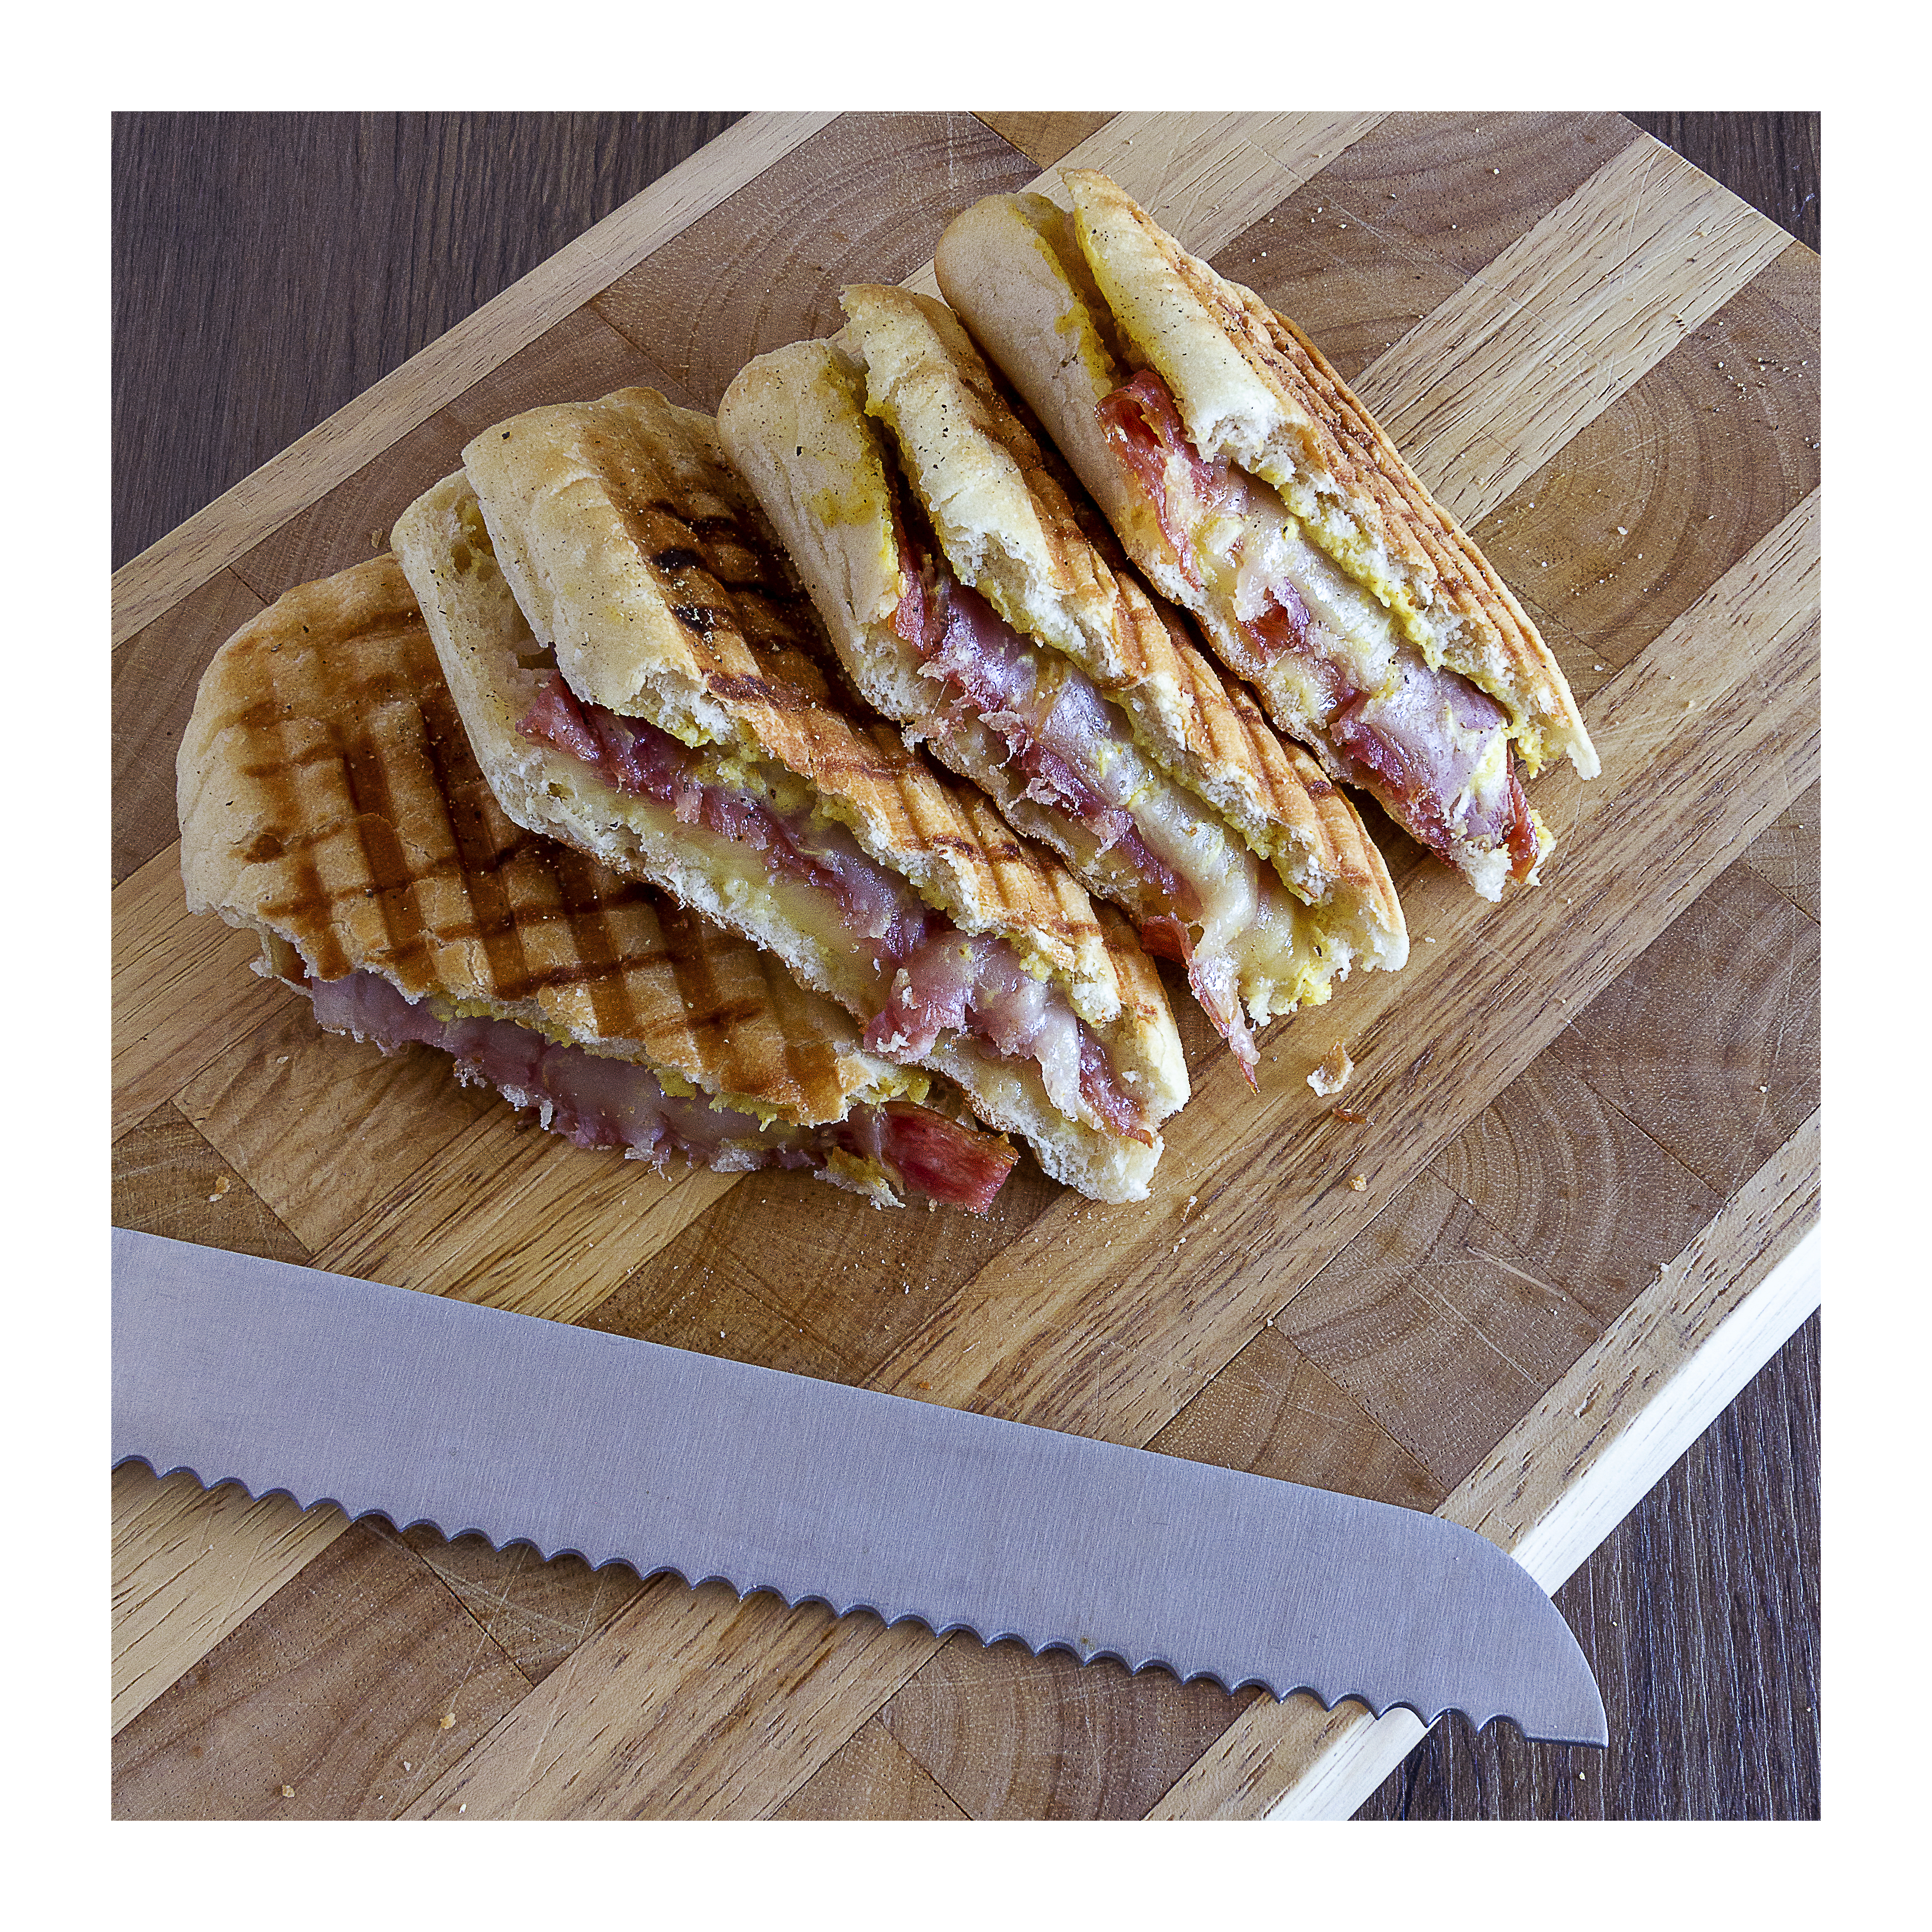 Panini Food Food Crumbs Lunch Meat Cheese Toast Cutting Board Wooden Surface Closeup Photography Spi 3906x3906